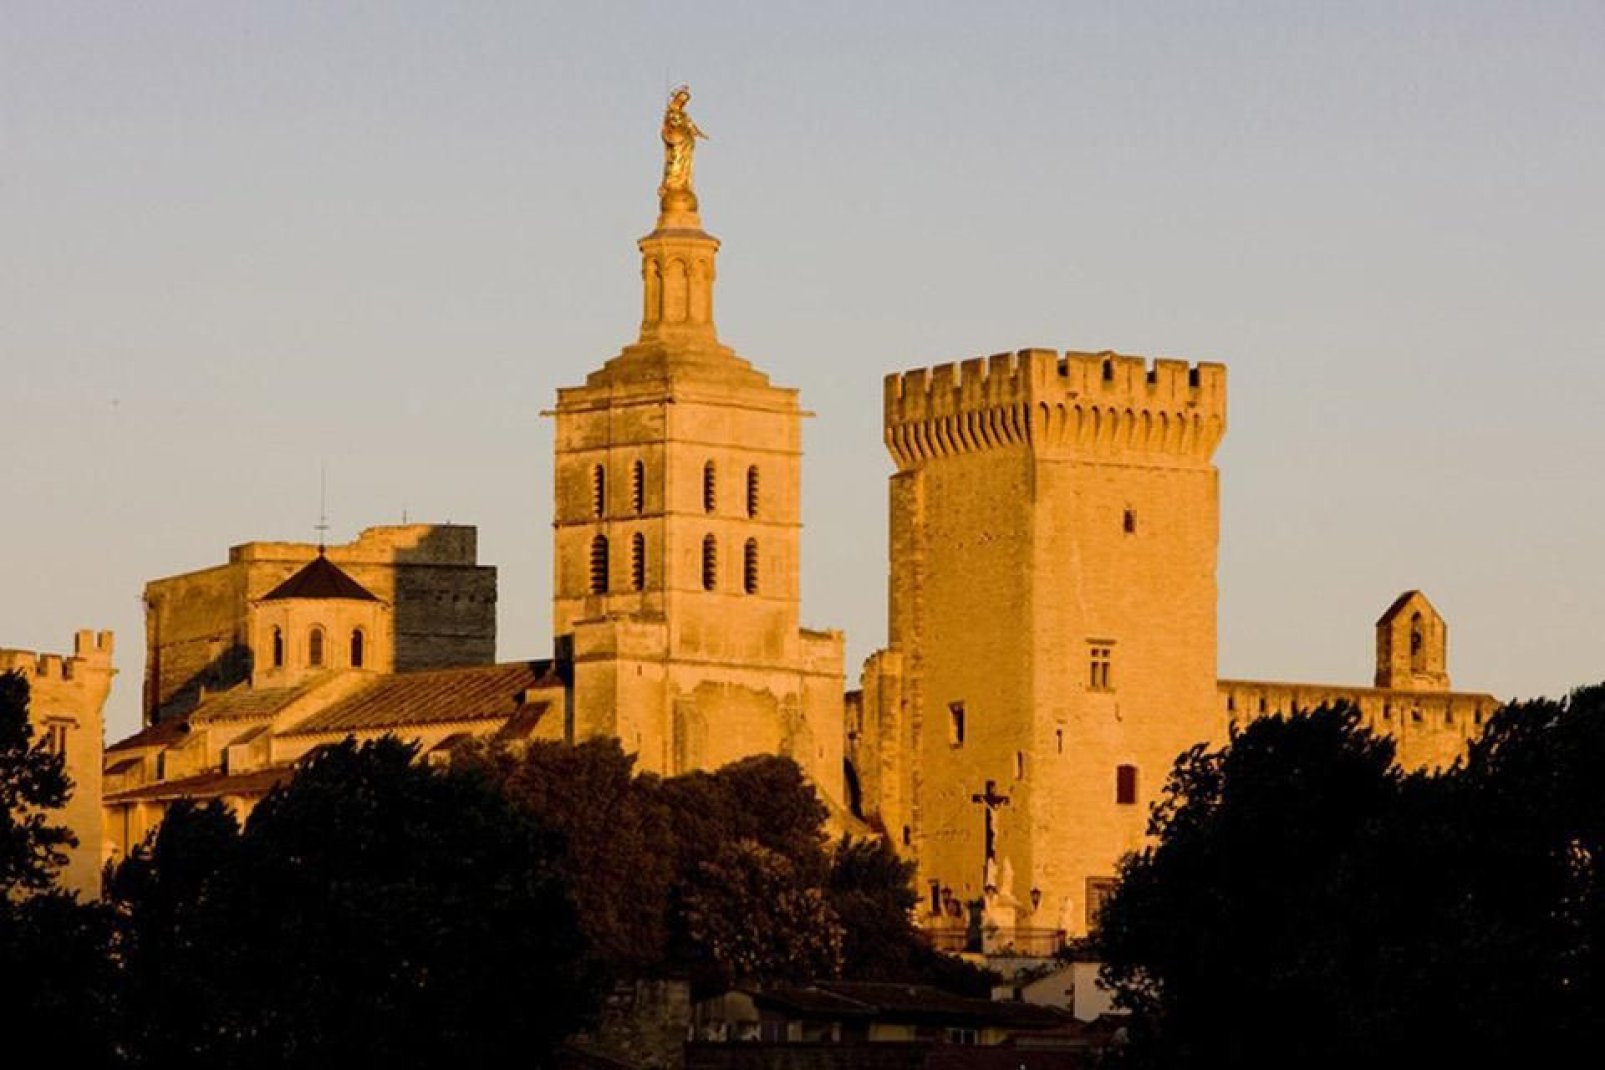 Protected by both the Doms Rock and the Rhône, Avignon is a haven of peace and well-being.